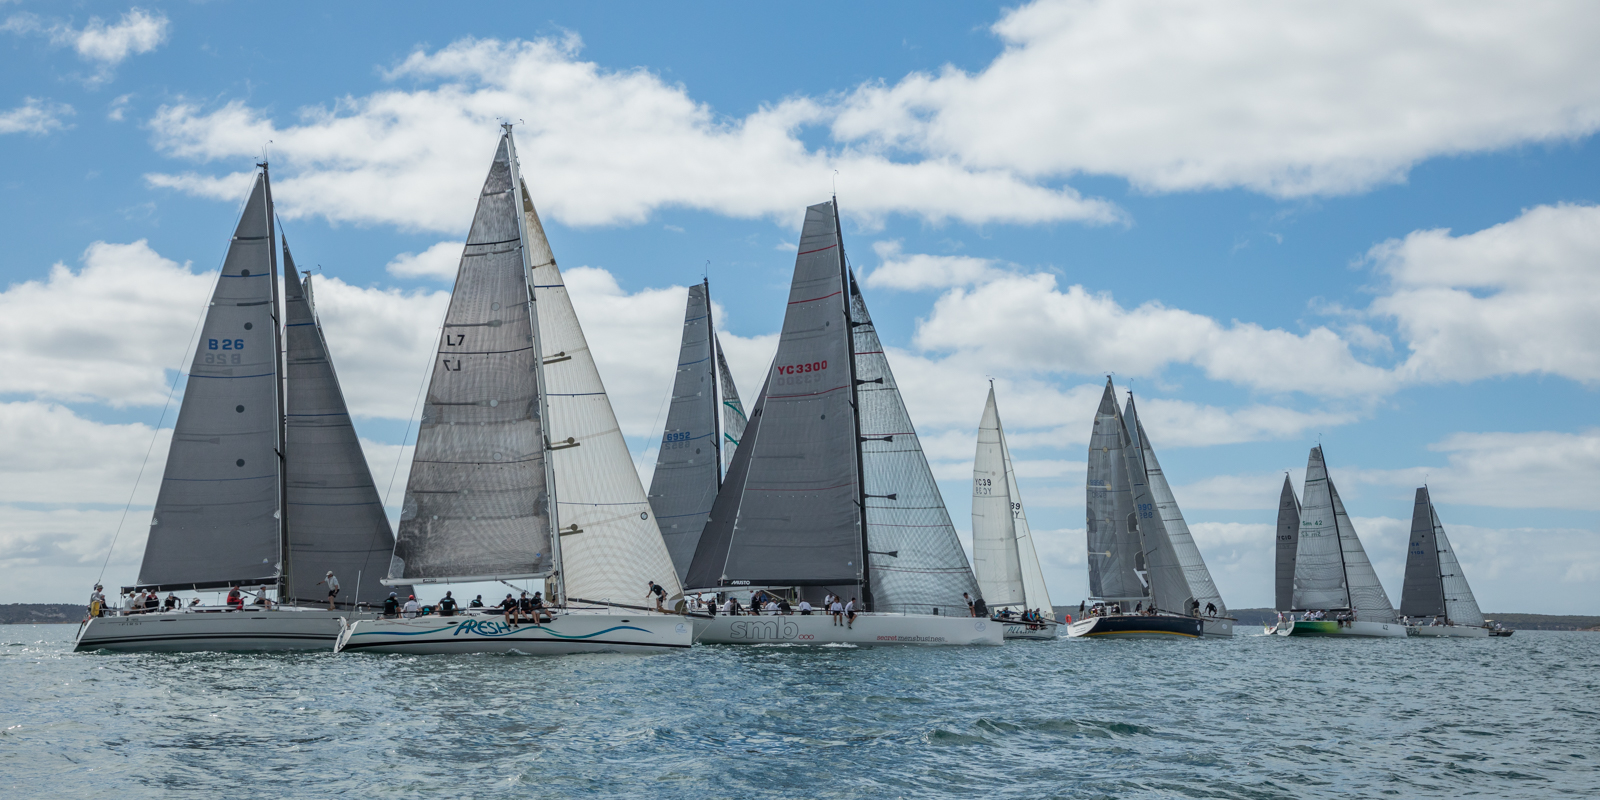 Division one racing on Boston Bay. Photos: Take 2 Photography